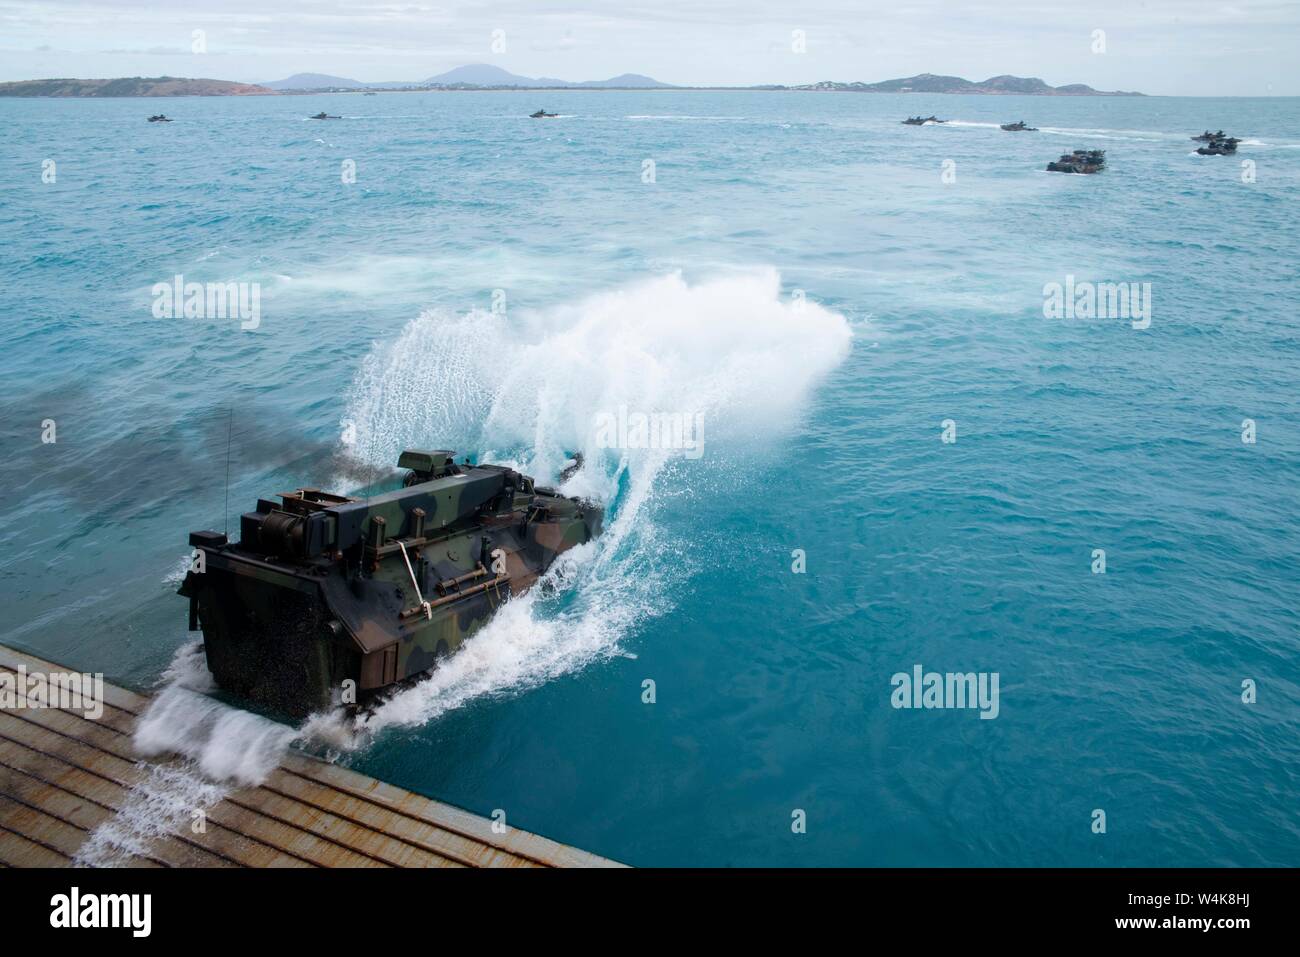 190722-N-DX072-1143 BOWEN, Australia (July 22, 2019) Assault amphibious vehicles (AAV), assigned to the 31st Marine Expeditionary Unit (MEU), depart the well deck of the amphibious transport dock ship USS Green Bay (LPD 20). Green Bay, part of the Wasp Expeditionary Strike Group, with embarked 31st MEU, is currently participating in Talisman Sabre 2019 off the coast of Northern Australia. A bilateral, biennial event, Talisman Sabre is designed to improve U.S. and Australian combat training, readiness and interoperability through realistic, relevant training necessary to maintain regional secur Stock Photo